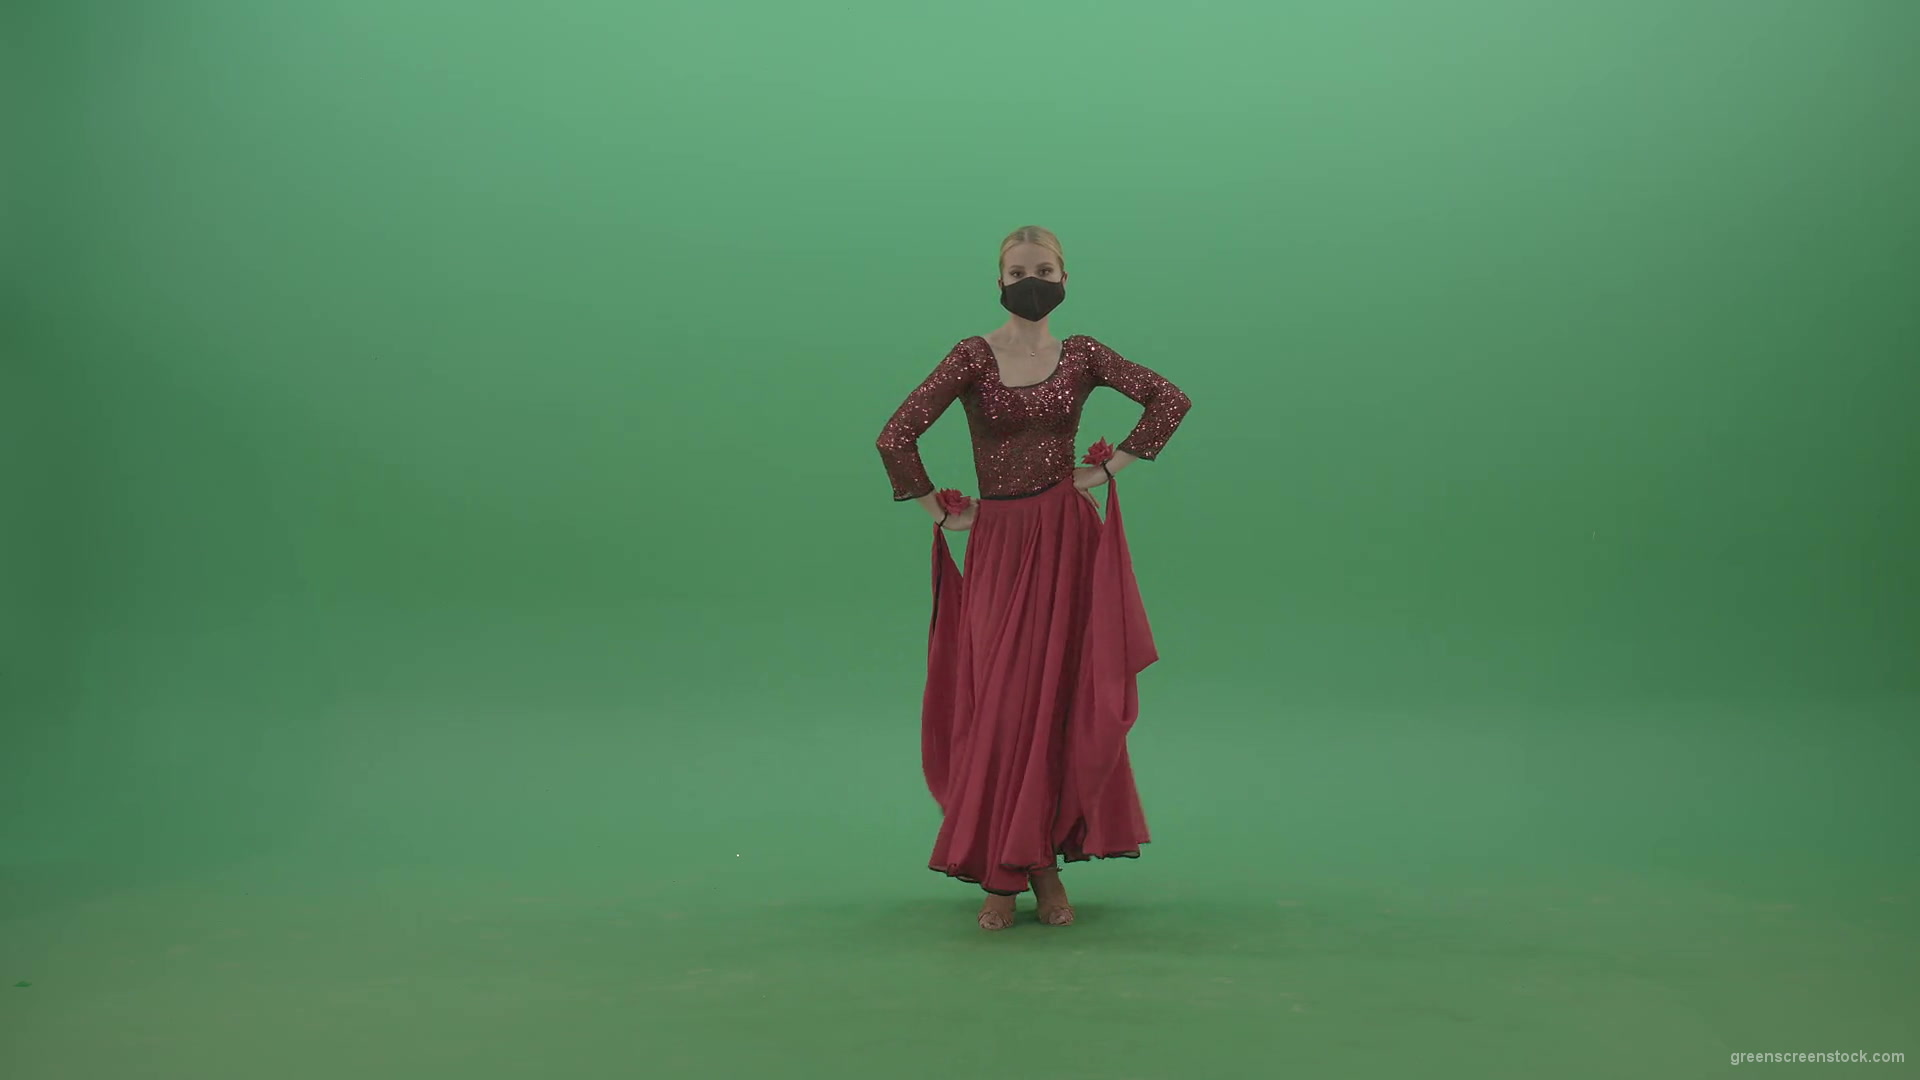 Beauty-Girl-with-black-mask-in-red-rumba-dress-waving-arms-isolated-on-green-screen-4K-Video-Footage-1920_009 Green Screen Stock